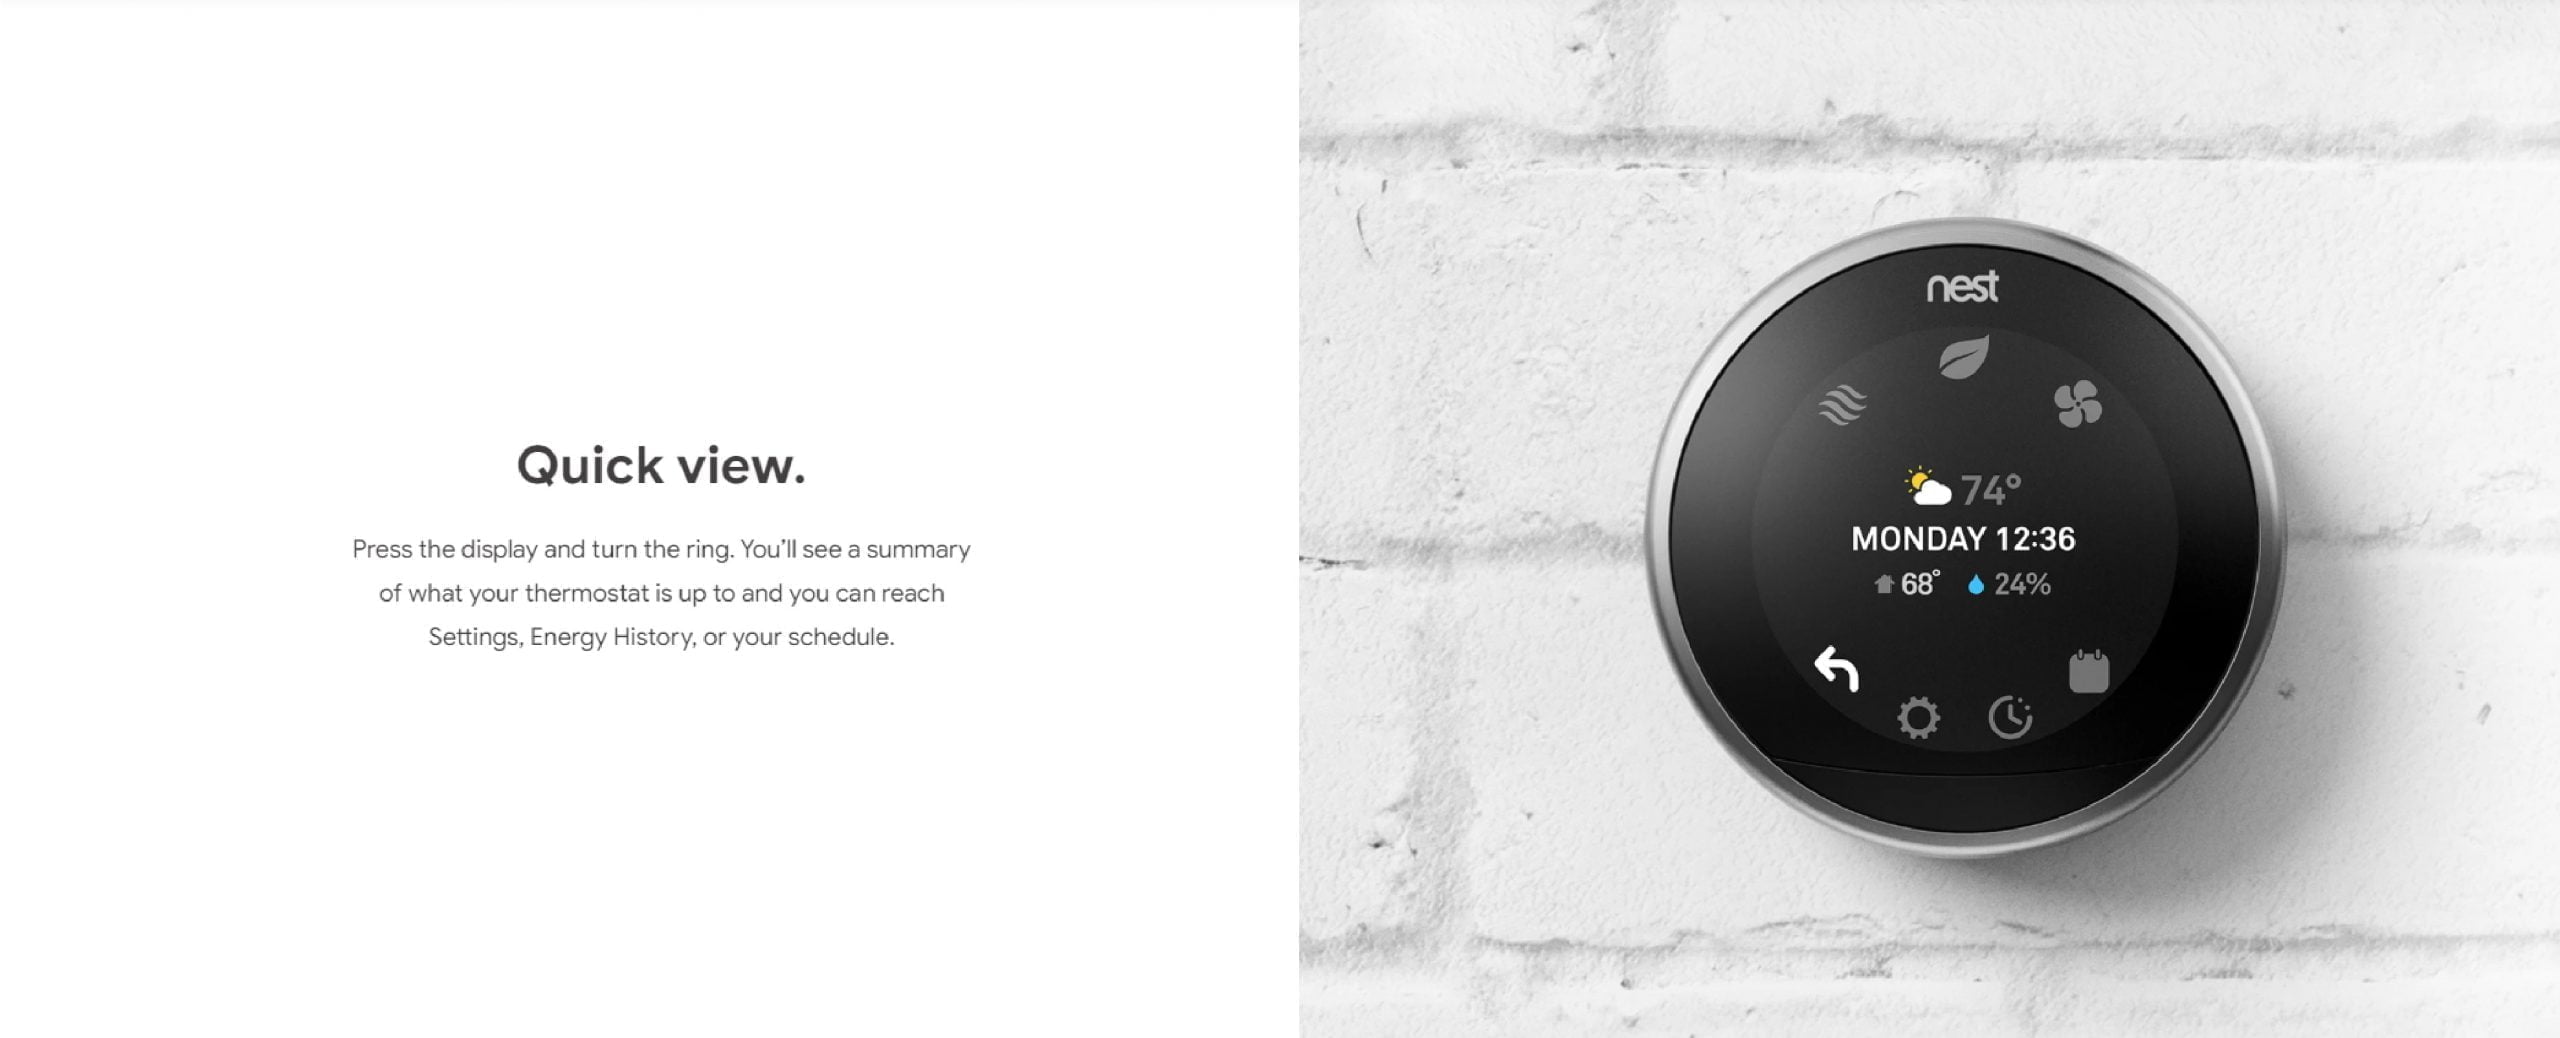 Nest 08 Scaled Google &Lt;H1&Gt;Google Nest Learning Smart Wifi Thermostat 3Rd Gen - T3018Us Mirror Black&Lt;/H1&Gt; &Lt;Ul Class=&Quot;A-Unordered-List A-Vertical A-Spacing-Mini&Quot;&Gt; &Lt;Li&Gt;&Lt;Span Class=&Quot;A-List-Item&Quot;&Gt;Auto-Schedule: No More Confusing Programming. It Learns The Temperatures You Like And Programs Itself.&Lt;/Span&Gt;&Lt;/Li&Gt; &Lt;Li&Gt;&Lt;Span Class=&Quot;A-List-Item&Quot;&Gt;Wi-Fi Thermostat: Connect The Nest Thermostat To Wi-Fi To Change The Temperature From Your Phone, Tablet Or Laptop.&Lt;/Span&Gt;&Lt;/Li&Gt; &Lt;Li&Gt;&Lt;Span Class=&Quot;A-List-Item&Quot;&Gt;Energy Saving: You’ll See The Nest Leaf When You Choose A Temperature That Saves Energy. It Guides You In The Right Direction.&Lt;/Span&Gt;&Lt;/Li&Gt; &Lt;Li&Gt;&Lt;Span Class=&Quot;A-List-Item&Quot;&Gt;Smart Thermostat: Early-On Nest Learns How Your Home Warms Up And Keeps An Eye On The Weather To Get You The Temperature You Want When You Want It.&Lt;/Span&Gt;&Lt;/Li&Gt; &Lt;Li&Gt;&Lt;Span Class=&Quot;A-List-Item&Quot;&Gt;Home/Away Assist: The Nest Thermostat Automatically Turns Itself Down When You’re Away To Avoid Heating Or Cooling An Empty Home.&Lt;/Span&Gt;&Lt;/Li&Gt; &Lt;Li&Gt;&Lt;Span Class=&Quot;A-List-Item&Quot;&Gt;Works With Amazon Alexa For Voice Control (Alexa Device Sold Separately)&Lt;/Span&Gt;&Lt;/Li&Gt; &Lt;Li&Gt;&Lt;Span Class=&Quot;A-List-Item&Quot;&Gt;Auto-Schedule: Nest Learns The Temperatures You Like And Programs Itself In About A Week.&Lt;/Span&Gt; &Lt;H5&Gt;Note : Direct Replacement Warranty One Year&Lt;/H5&Gt; &Lt;Div Class=&Quot;Html-Fragment&Quot;&Gt; &Lt;Div&Gt; &Lt;B&Gt;We Also Provide International Wholesale And Retail Shipping To All Gcc Countries: Saudi Arabia, Qatar, Oman, Kuwait, Bahrain.&Lt;/B&Gt; &Lt;/Div&Gt; &Lt;/Div&Gt;&Lt;/Li&Gt; &Lt;/Ul&Gt; &Lt;Div Class=&Quot;A-Row A-Expander-Container A-Expander-Inline-Container&Quot; Aria-Live=&Quot;Polite&Quot;&Gt; &Lt;Div Class=&Quot;A-Expander-Content A-Expander-Extend-Content A-Expander-Content-Expanded&Quot; Aria-Expanded=&Quot;True&Quot;&Gt;&Lt;/Div&Gt; &Lt;/Div&Gt; Thermostat Google Nest Learning Smart Wifi Thermostat 3Rd Gen - T3018Us Mirror Black